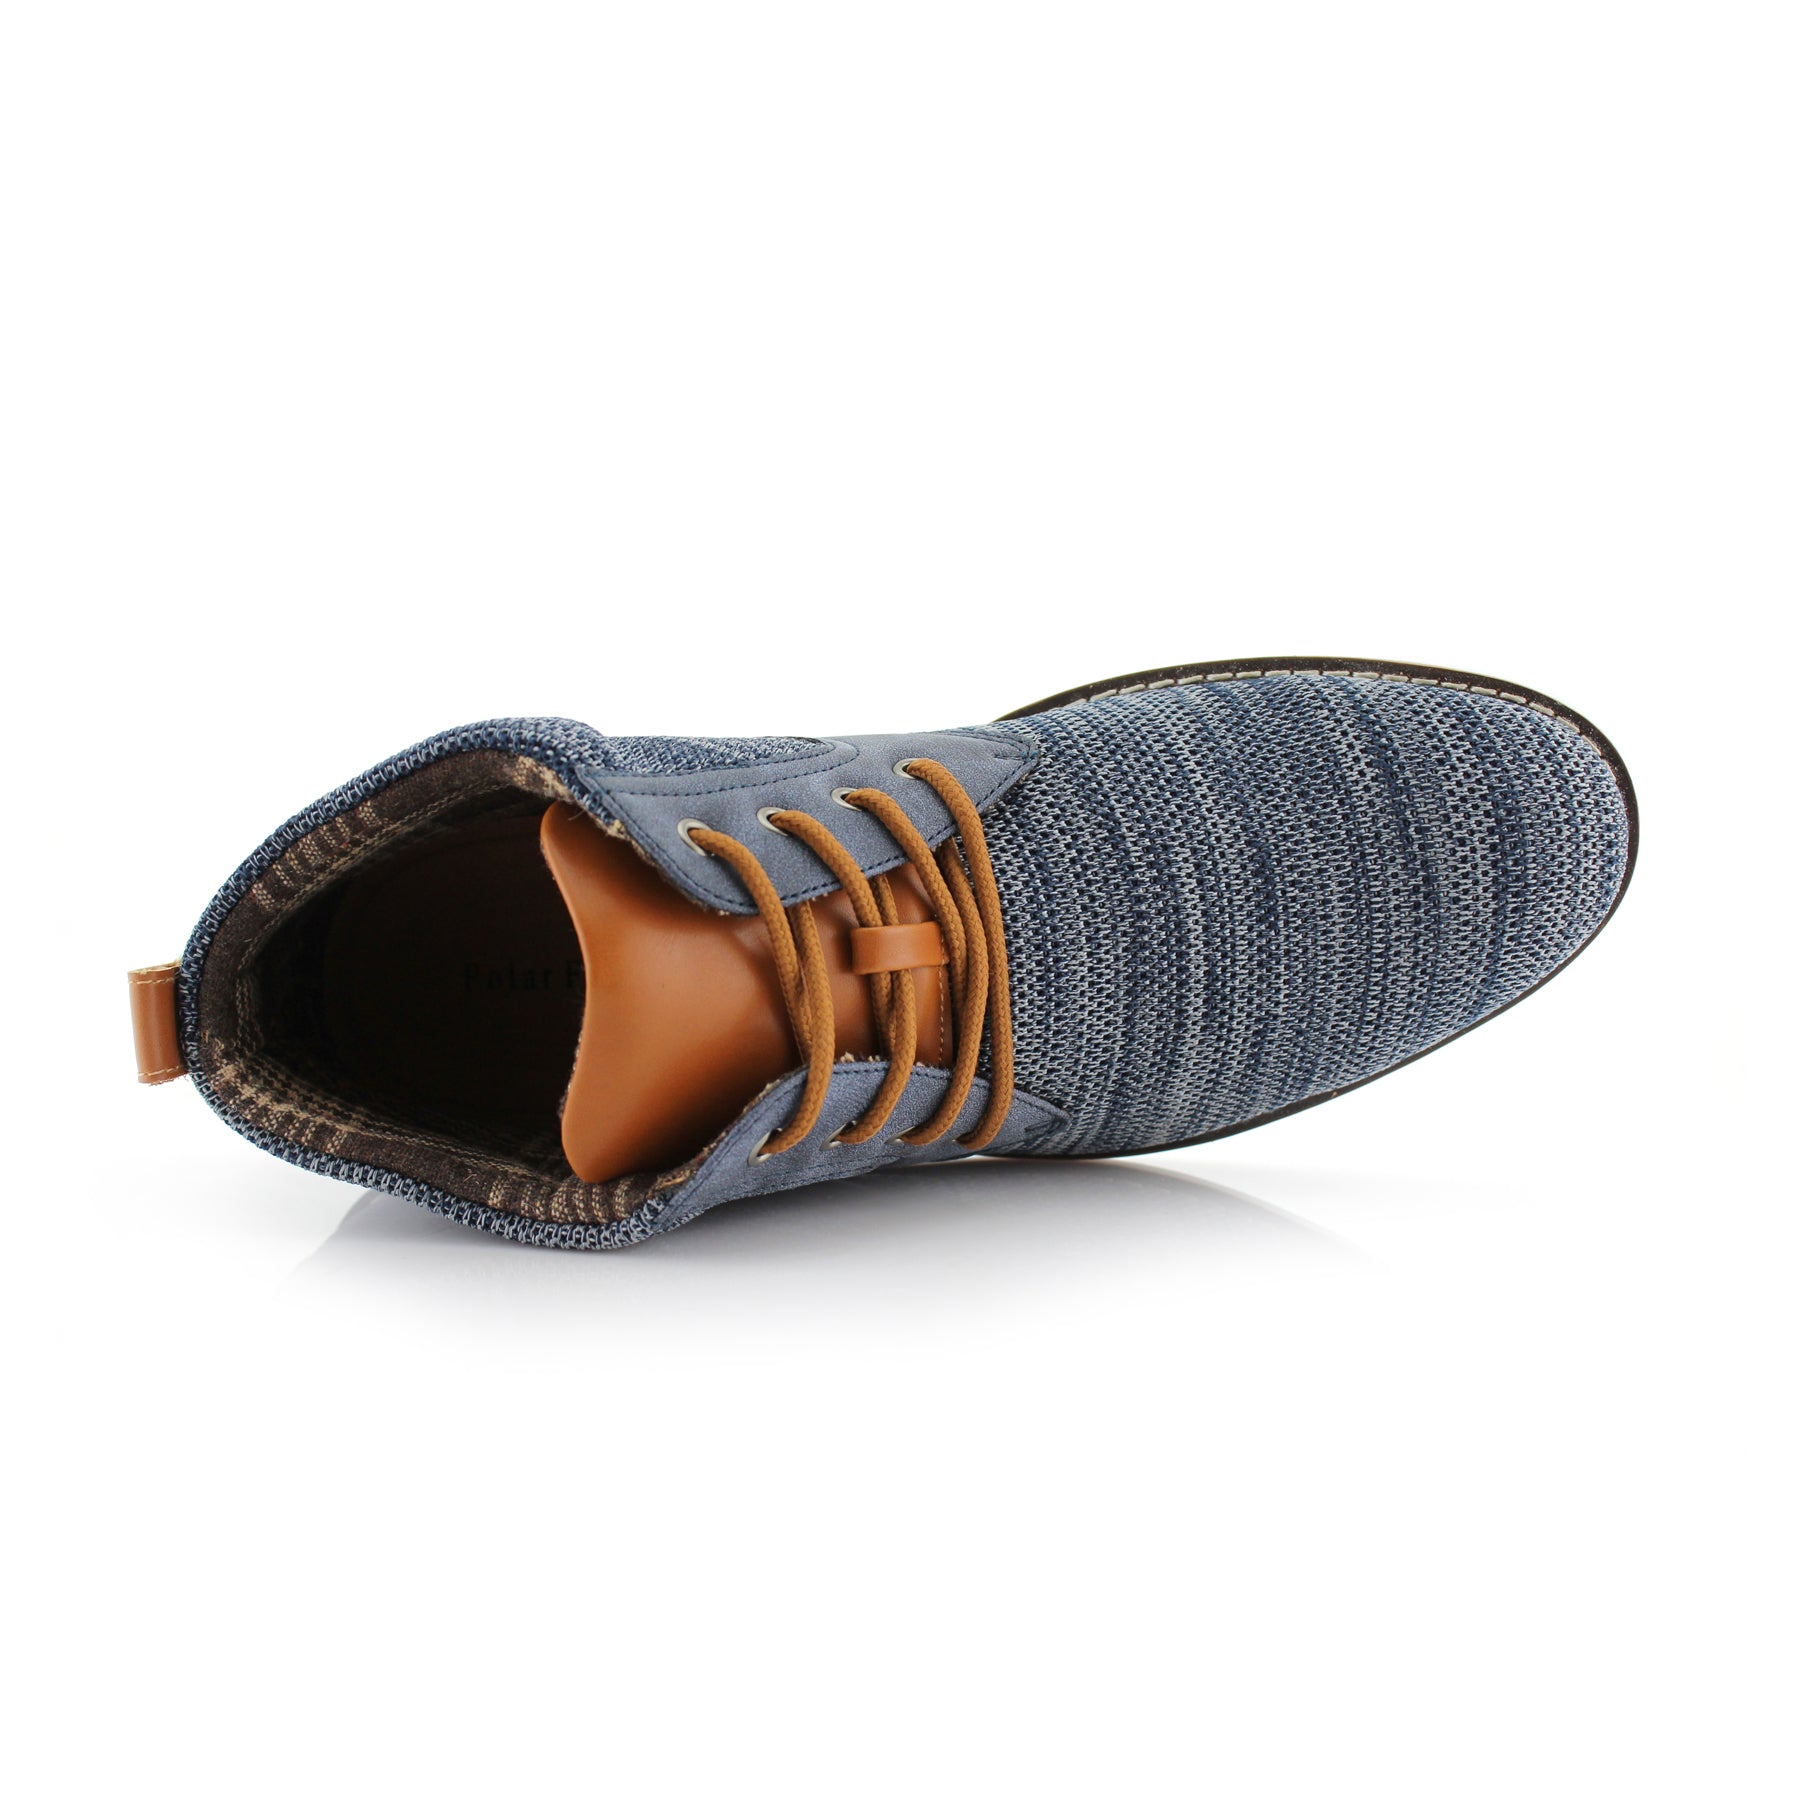 Duo-textured Sneaker Chukka Boots | Bohort by Polar Fox | Conal Footwear | Top-Down Angle View